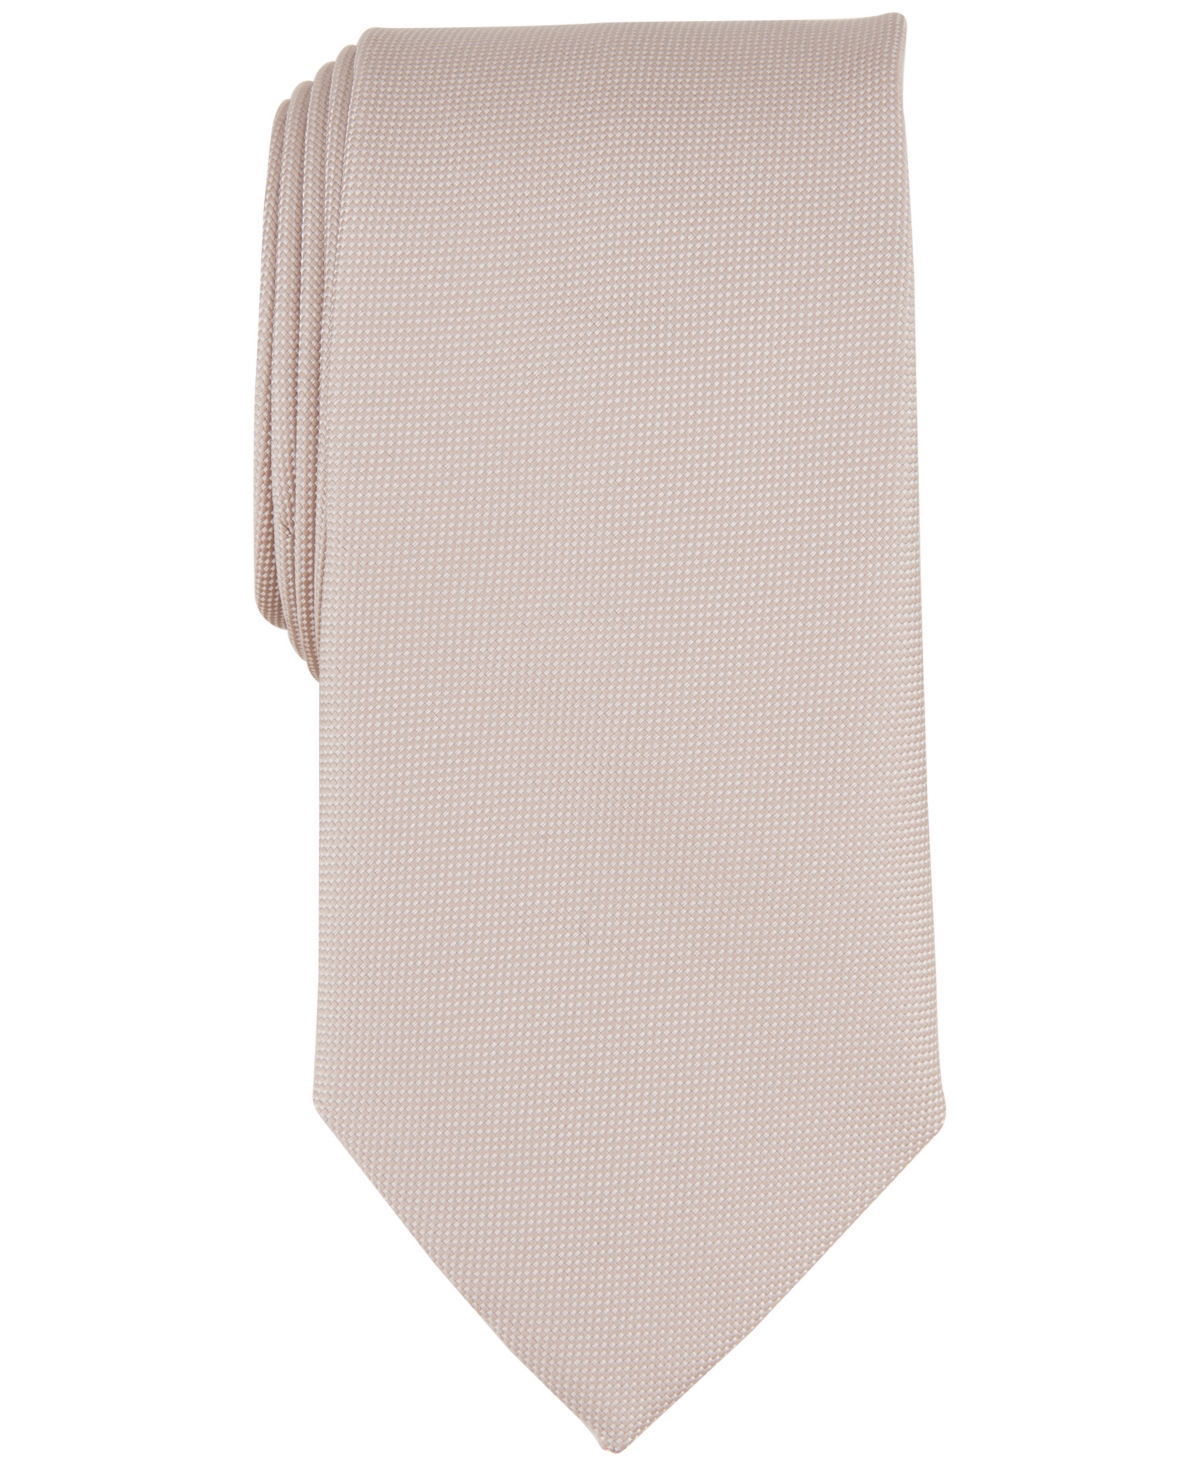 Men's Solid Tie, Created for Macy's - Taupe